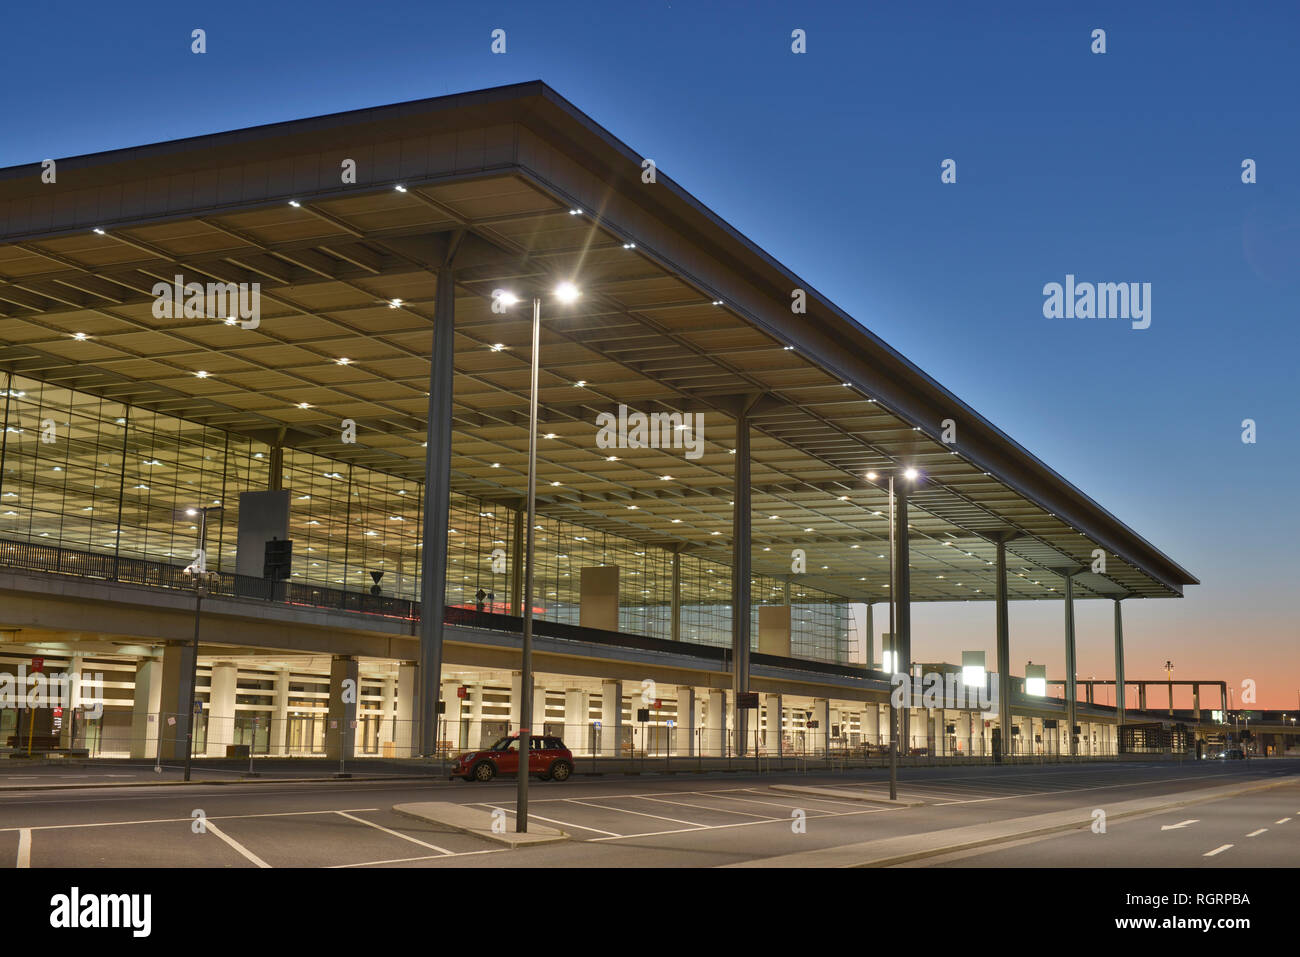 Flughafen Ber High Resolution Stock Photography and Images - Alamy